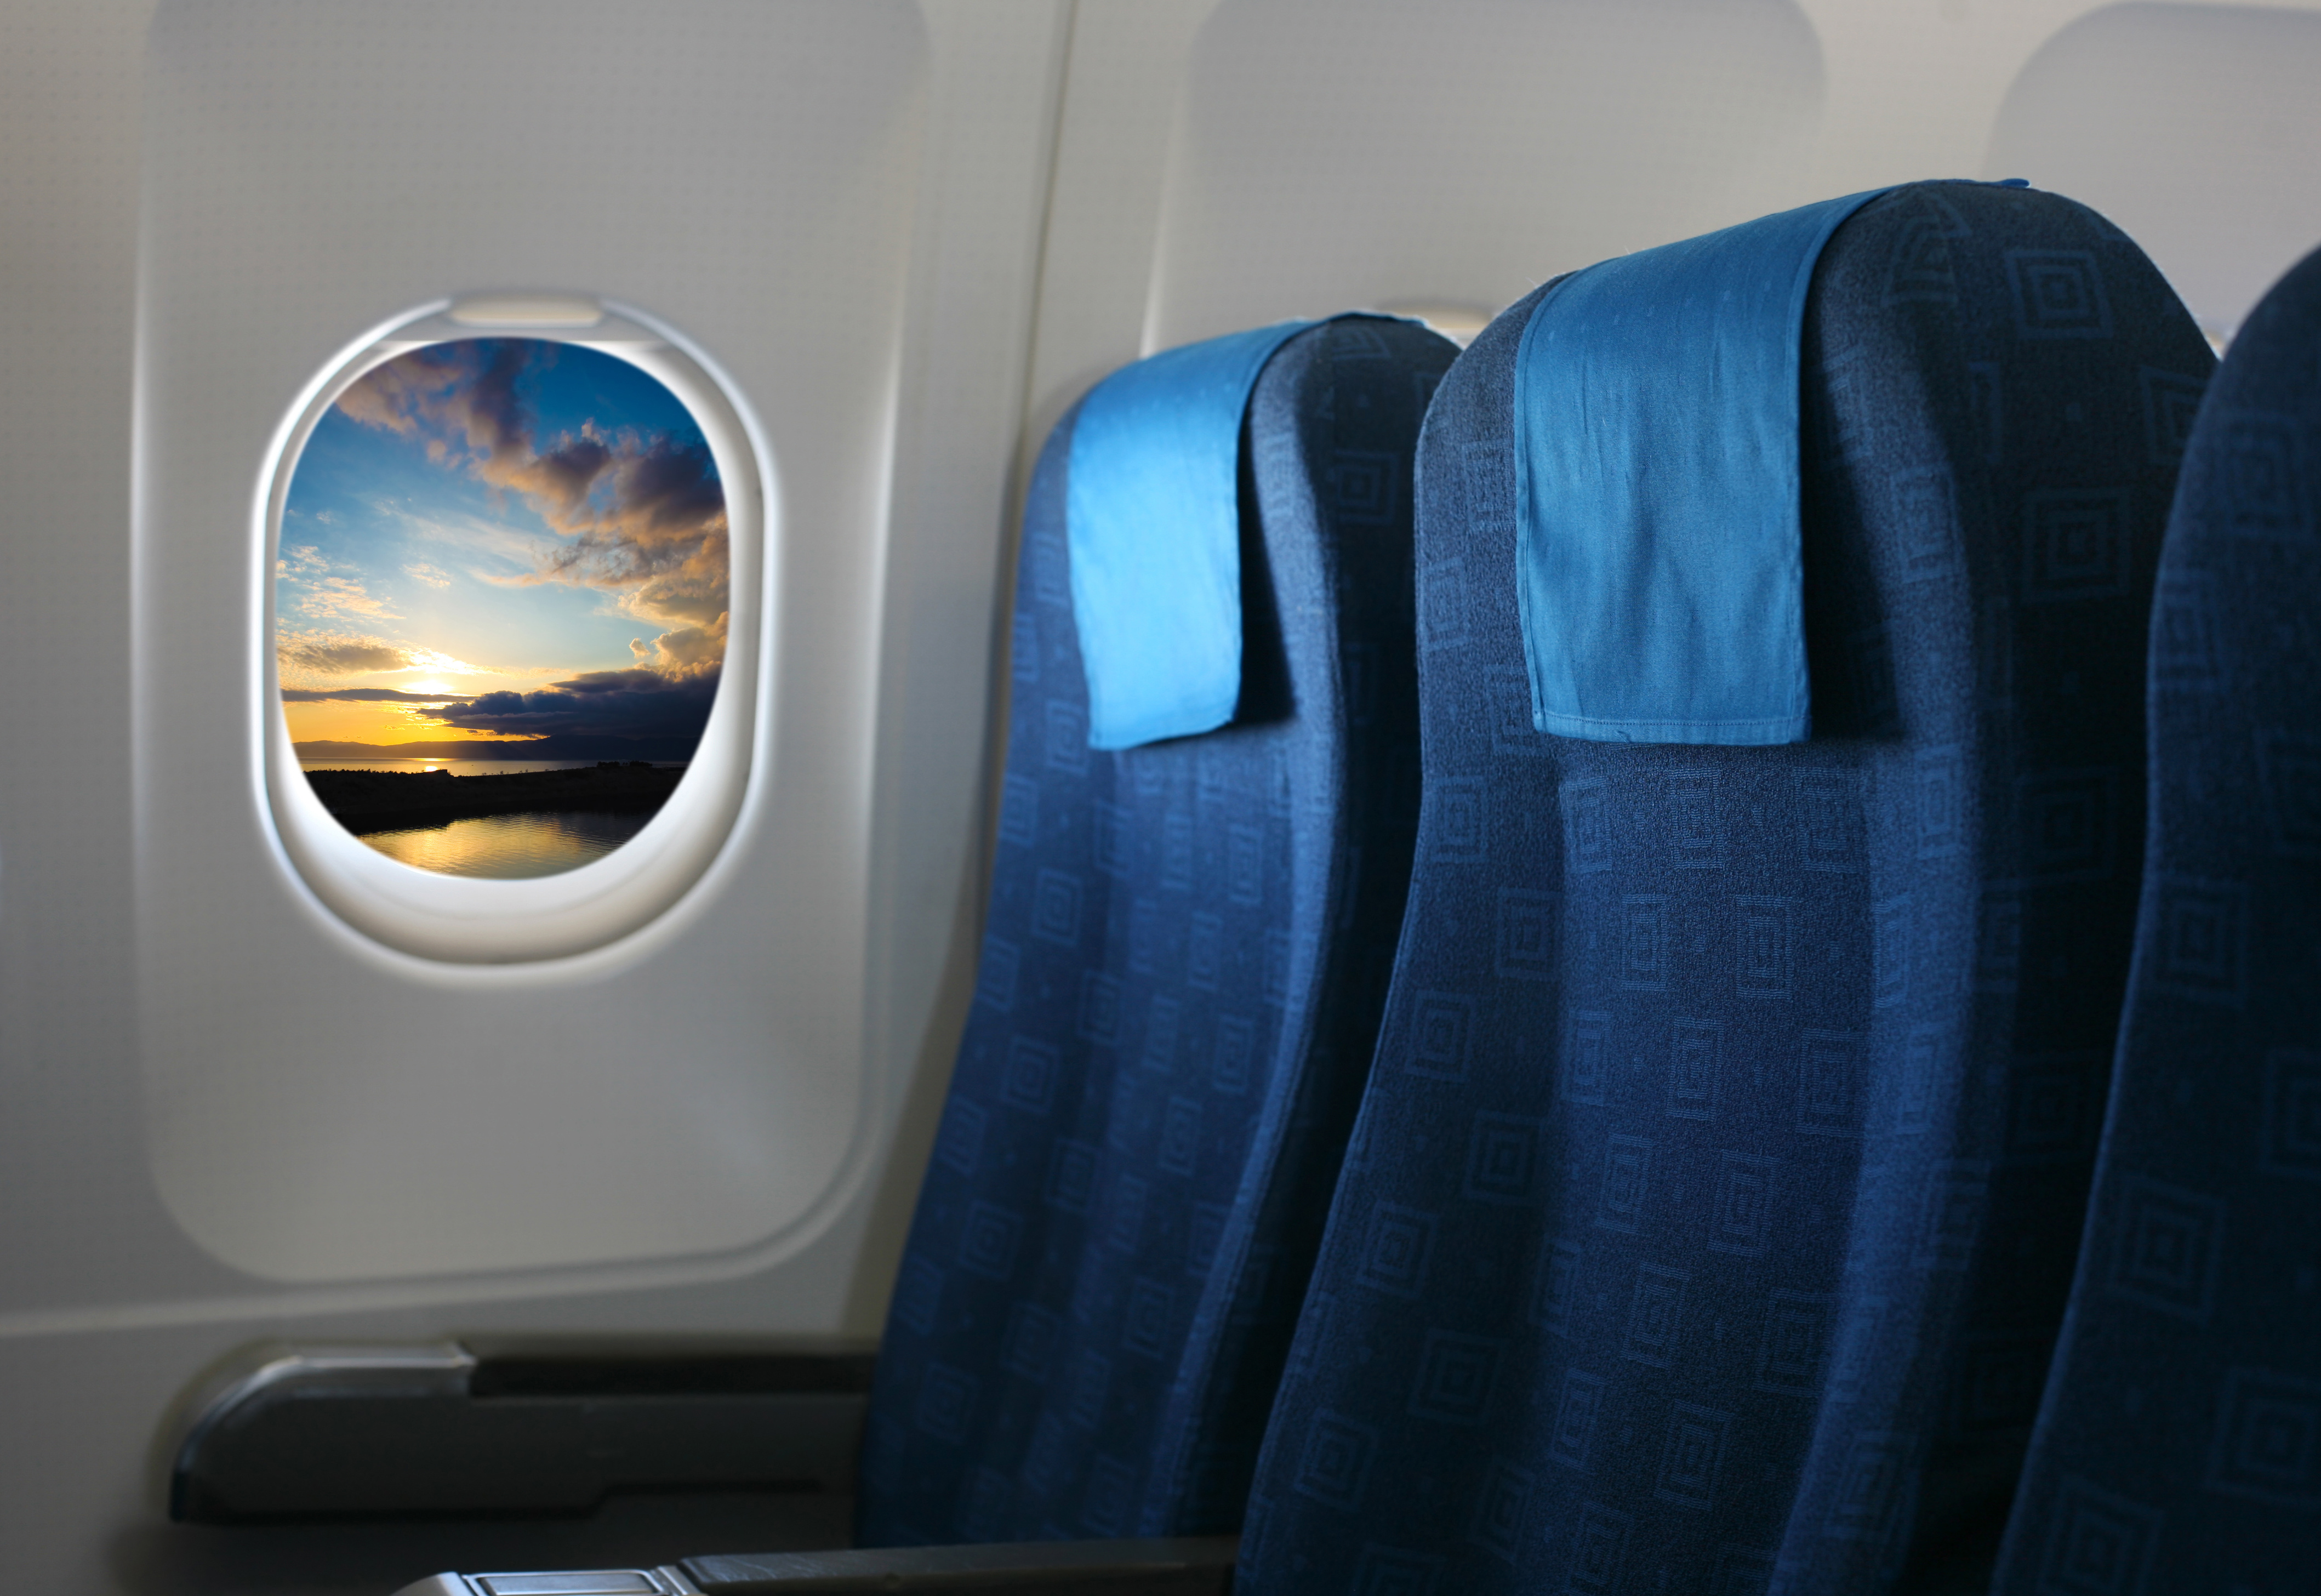 Plane Ride Tips – Make The Most Of Your Ride